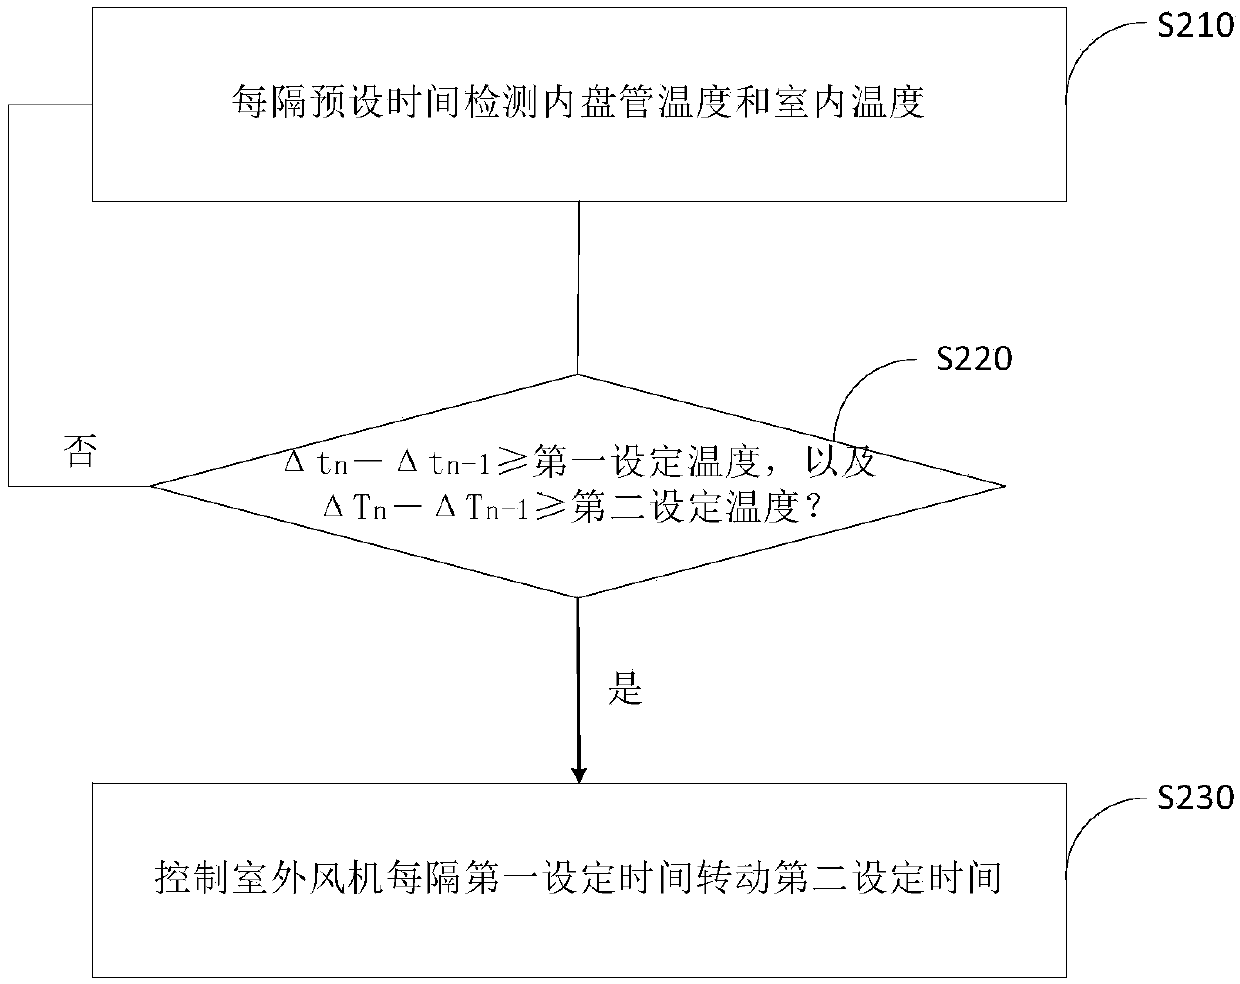 Defrosting control method for fixed-frequency air conditioner